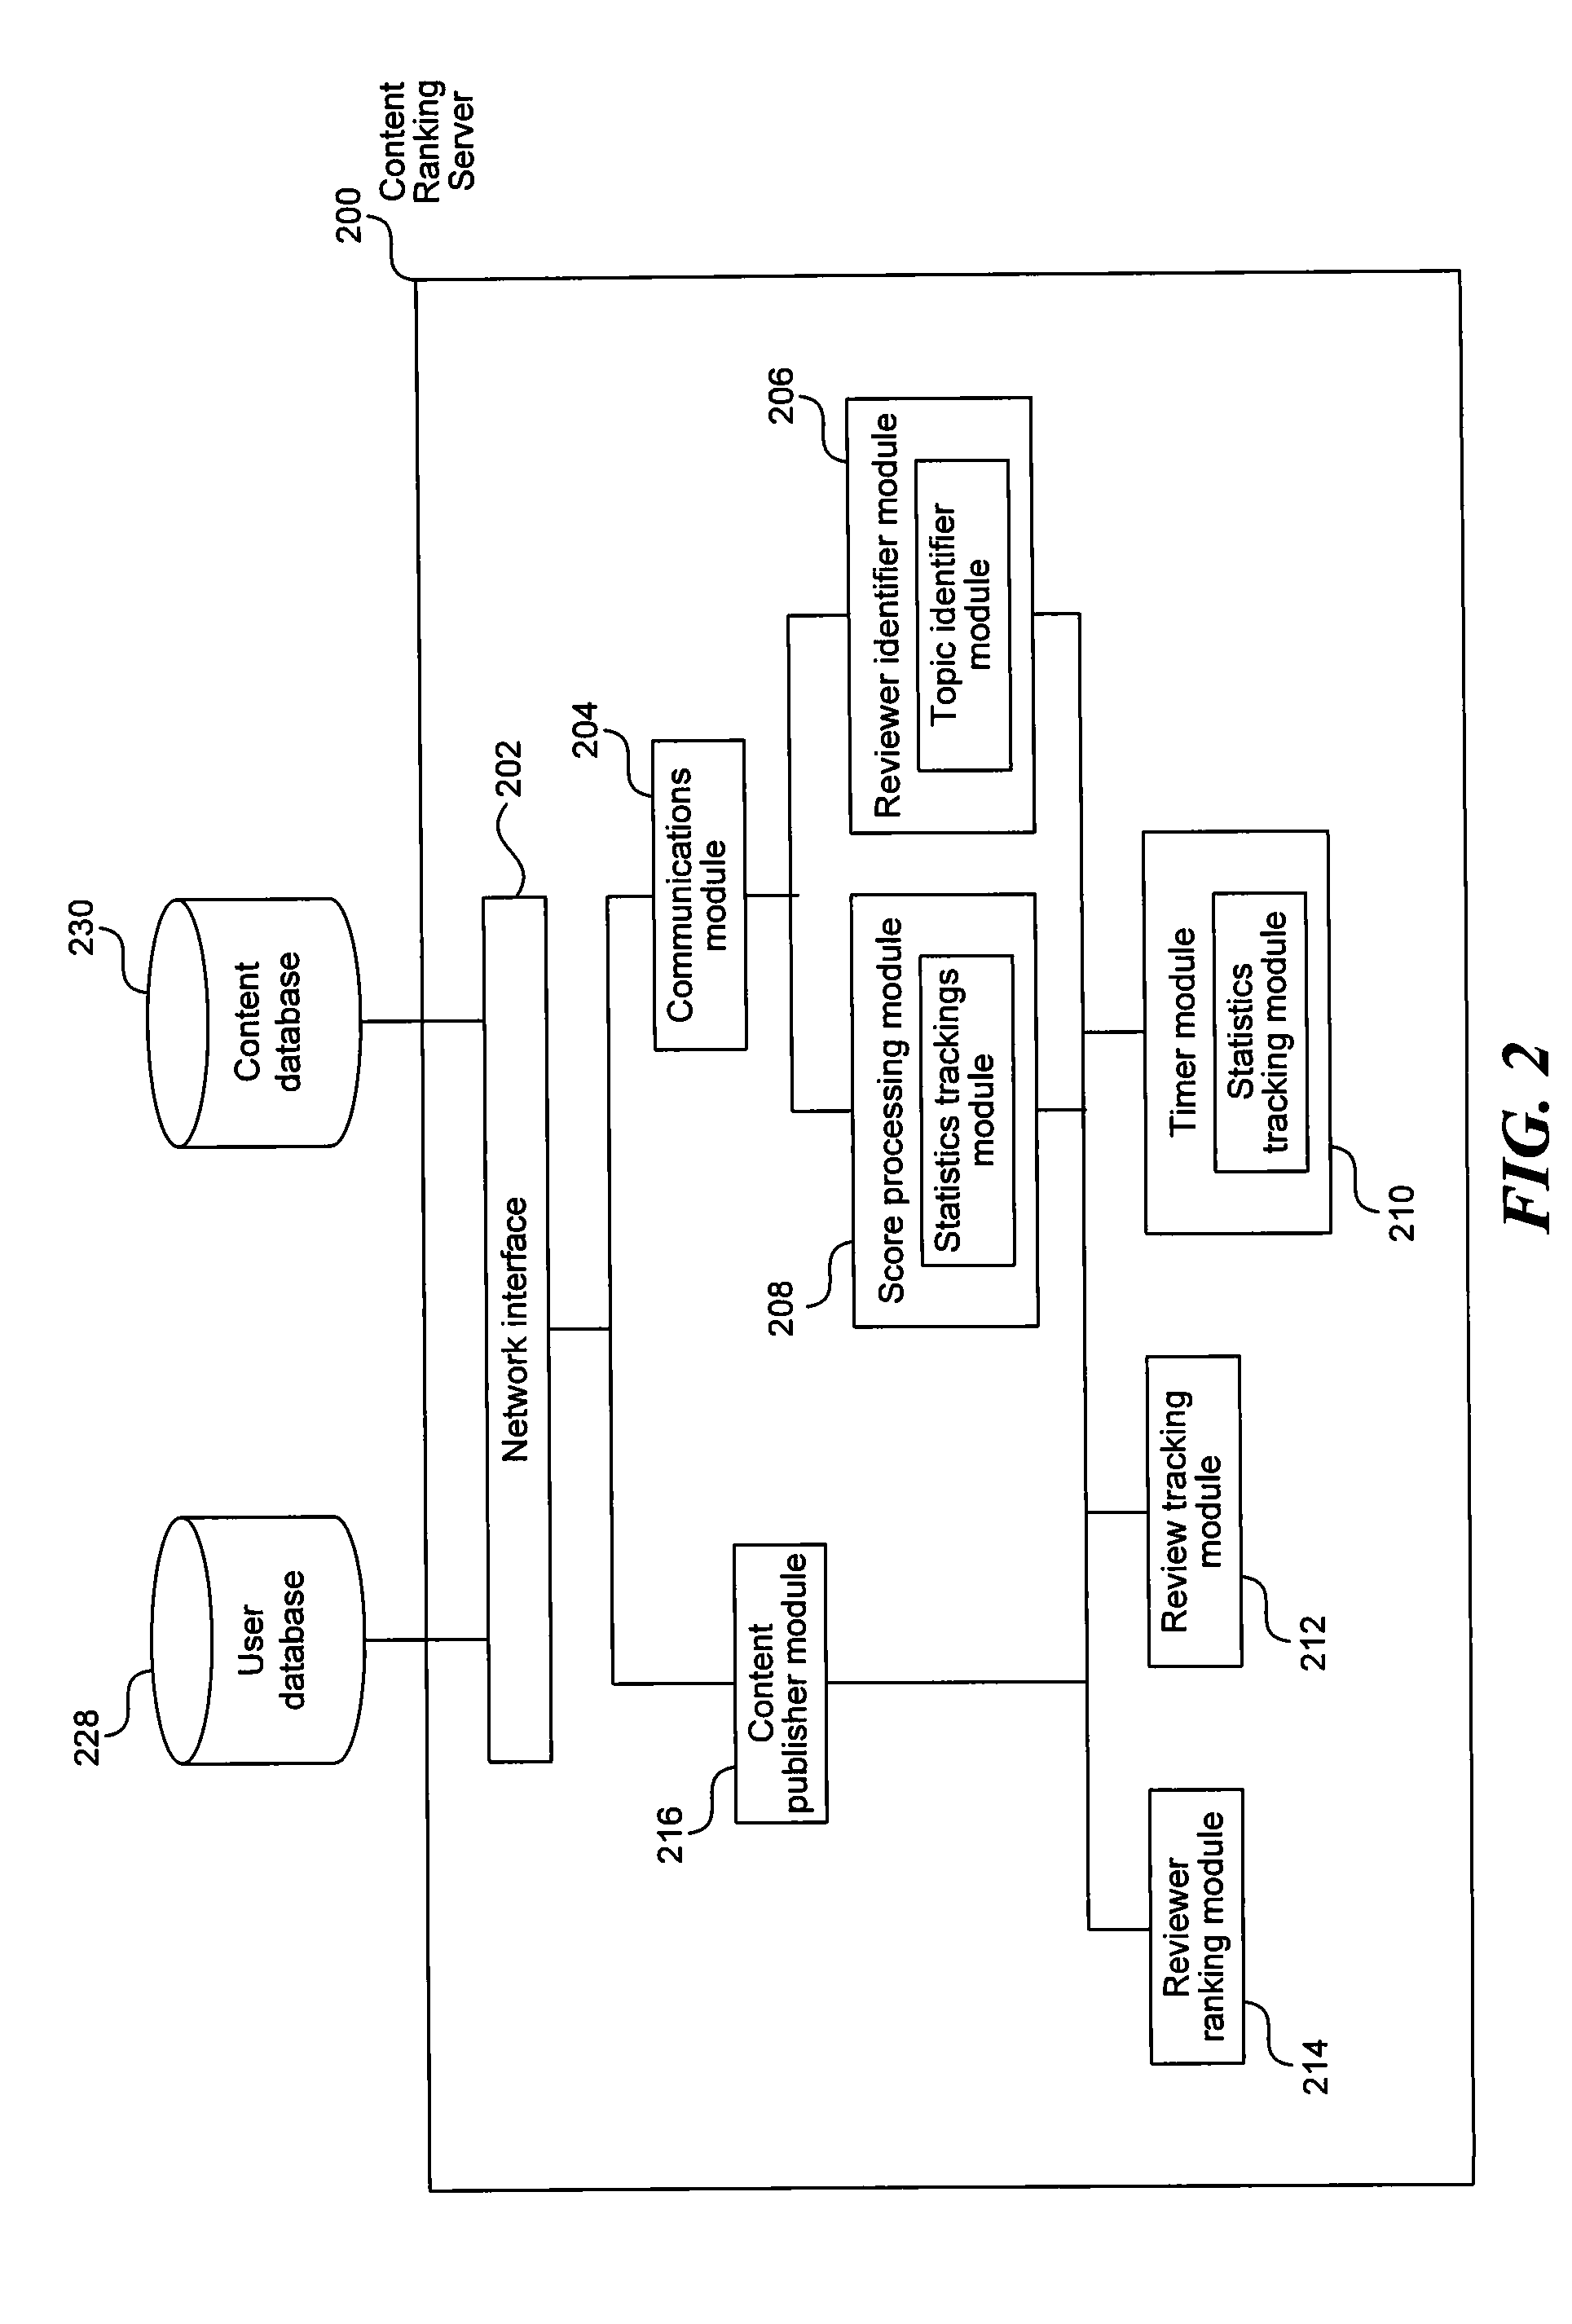 System and method for content ranking and reviewer selection